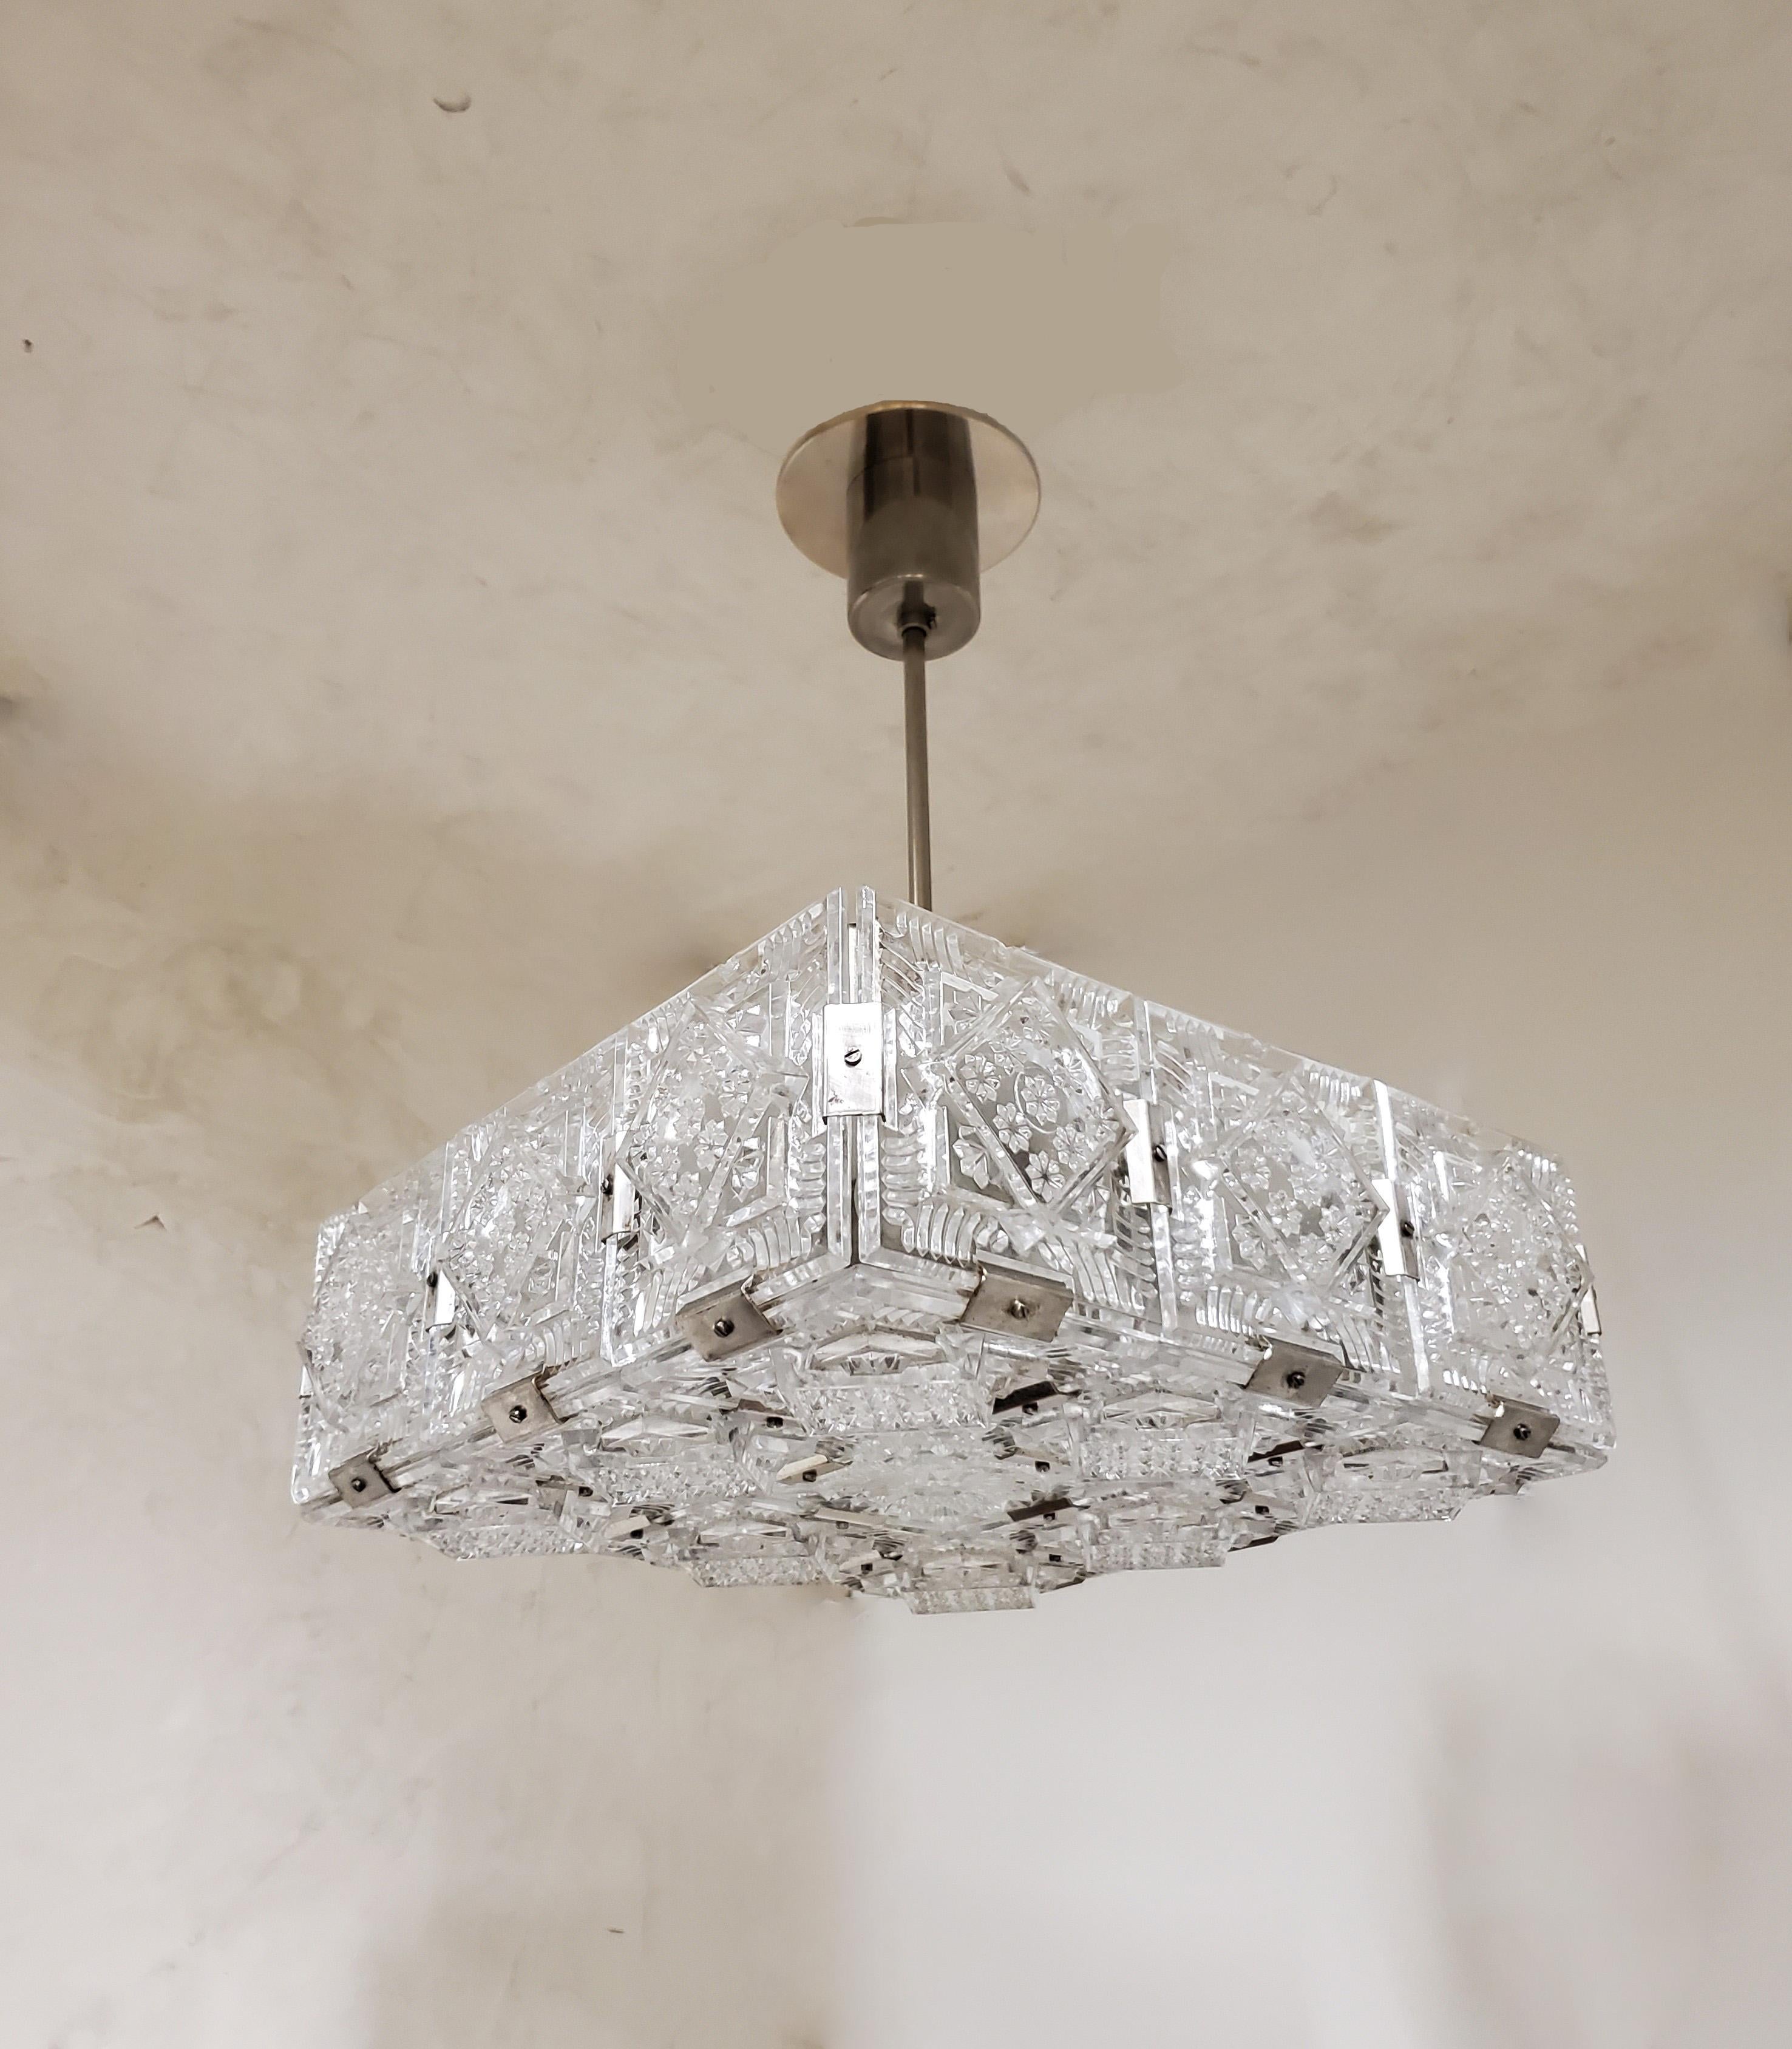 Pair of Mid-Century Modern Square Chandeliers in Glass and Nickel For Sale 3